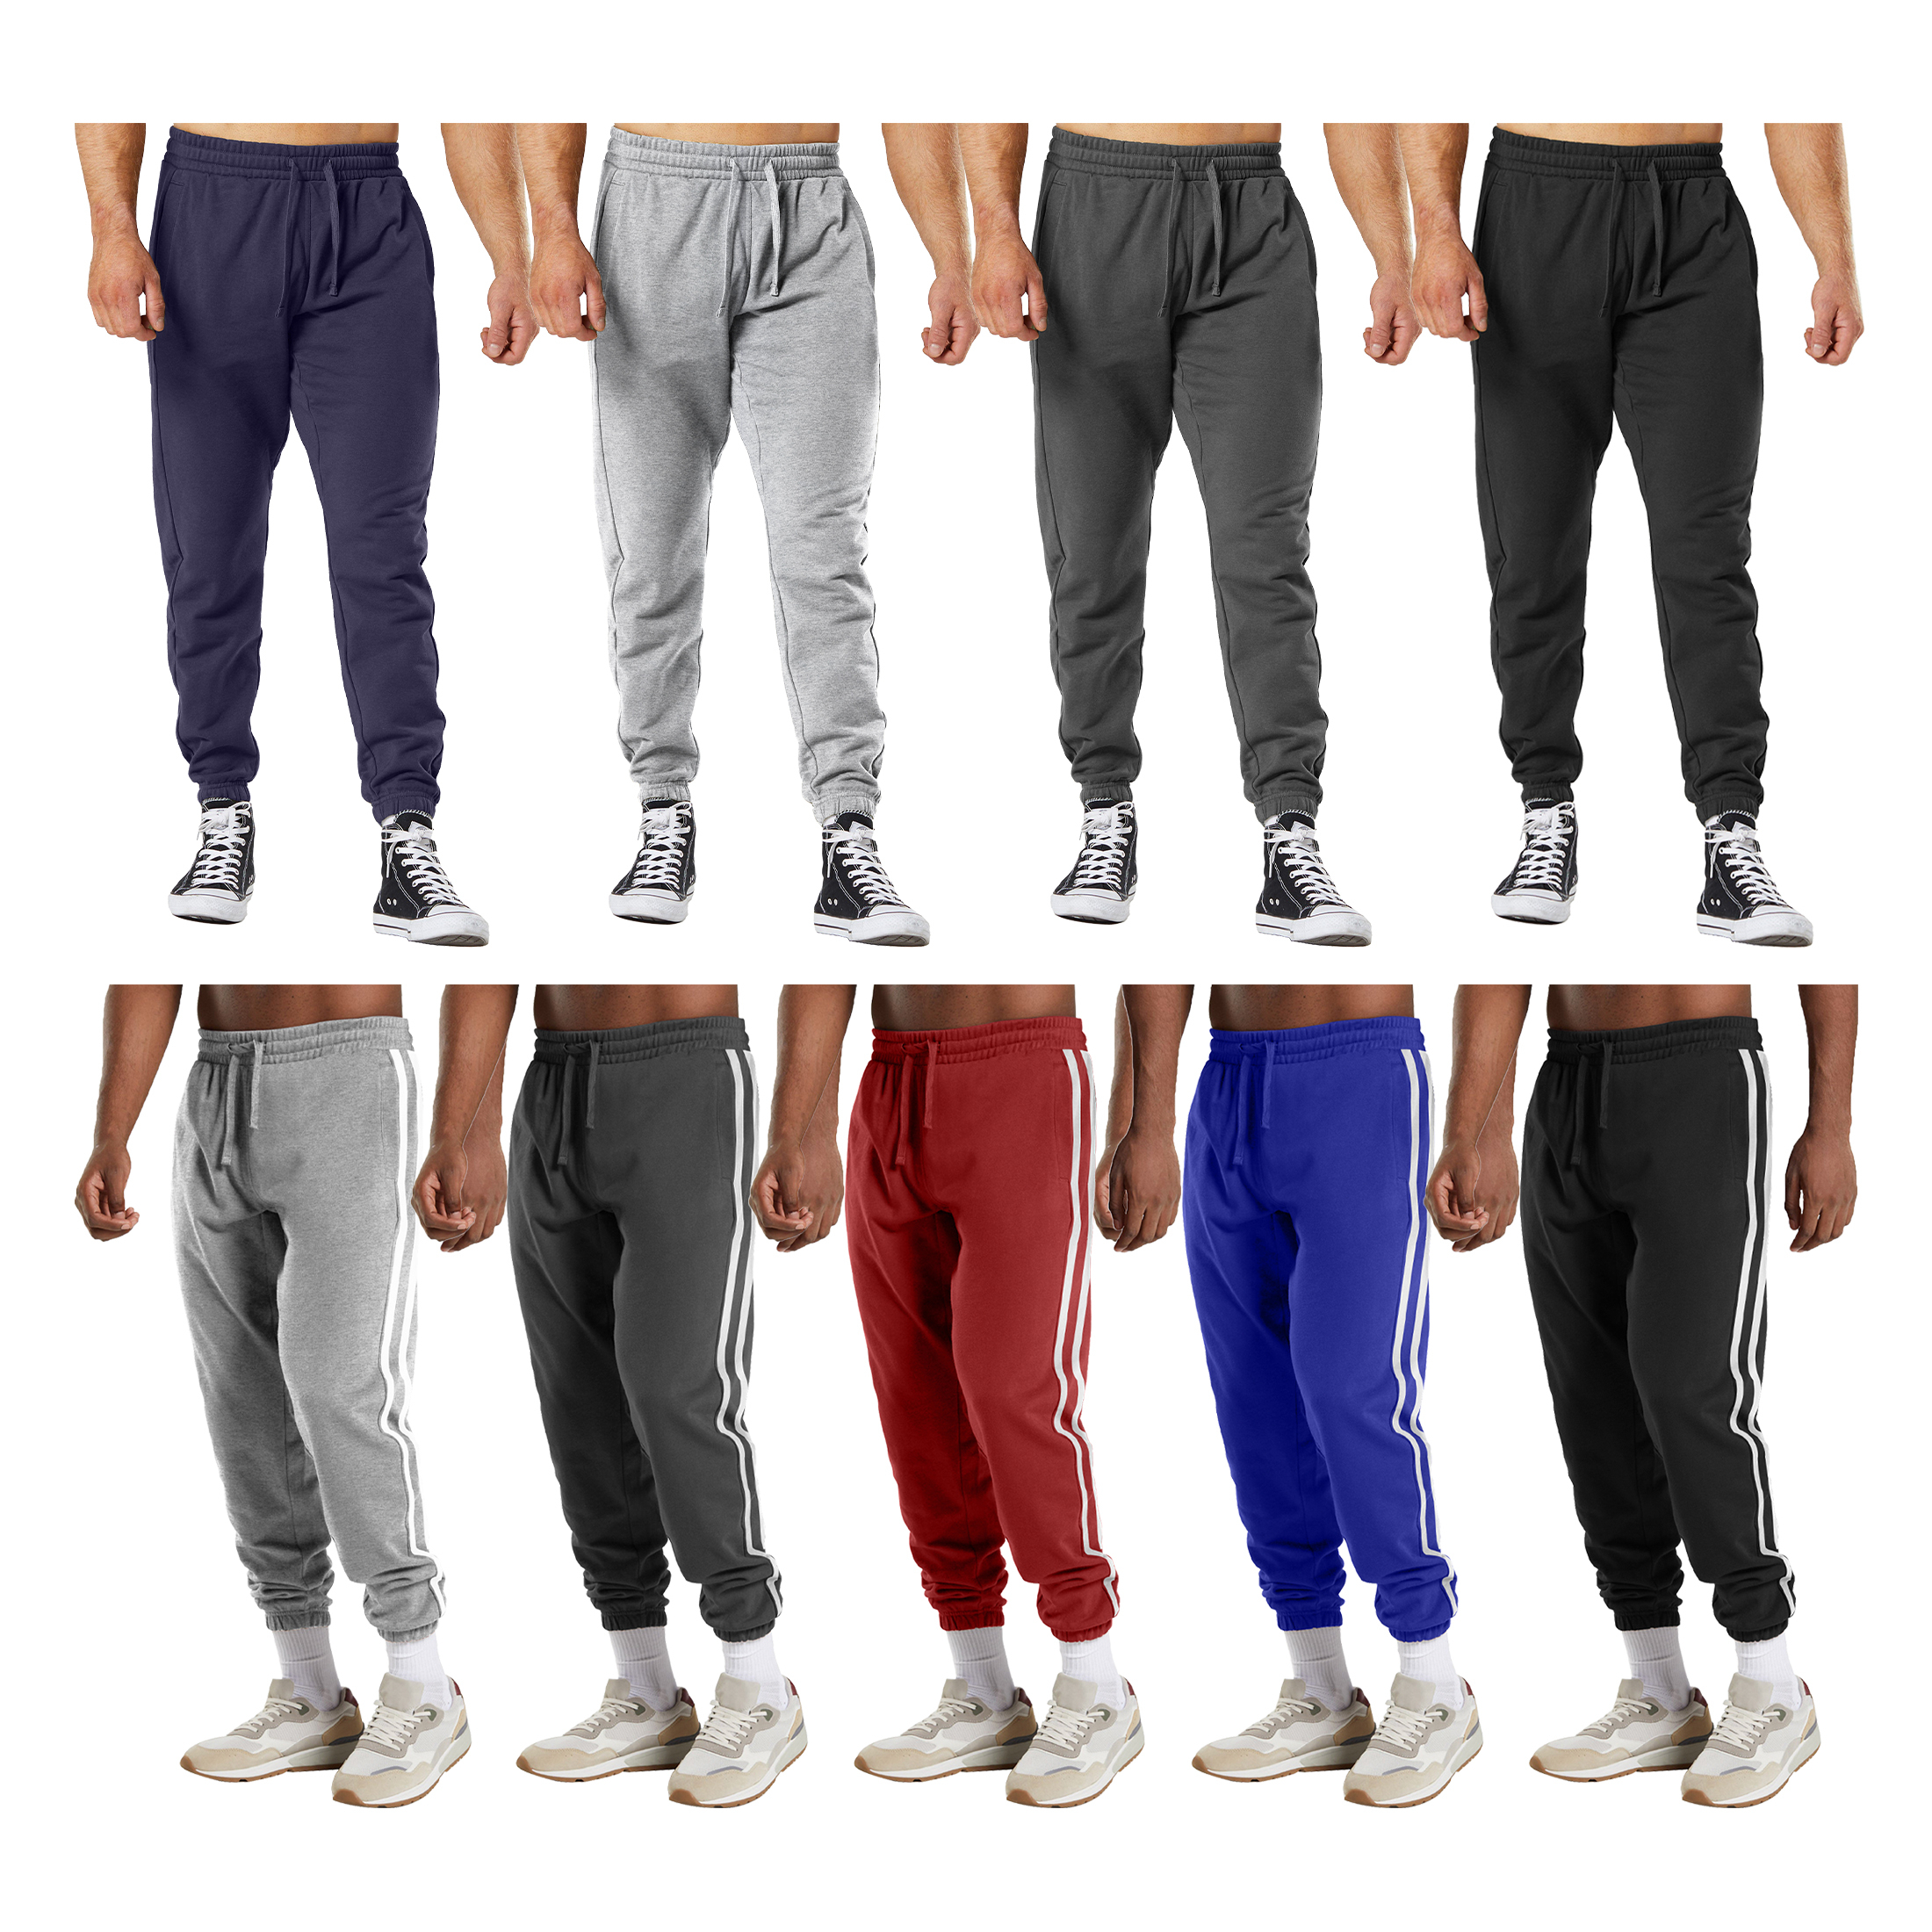 Multi-Pack: Men's Casual Fleece-Lined Elastic Bottom Jogger Pants With Pockets - 2-PACK, XXL